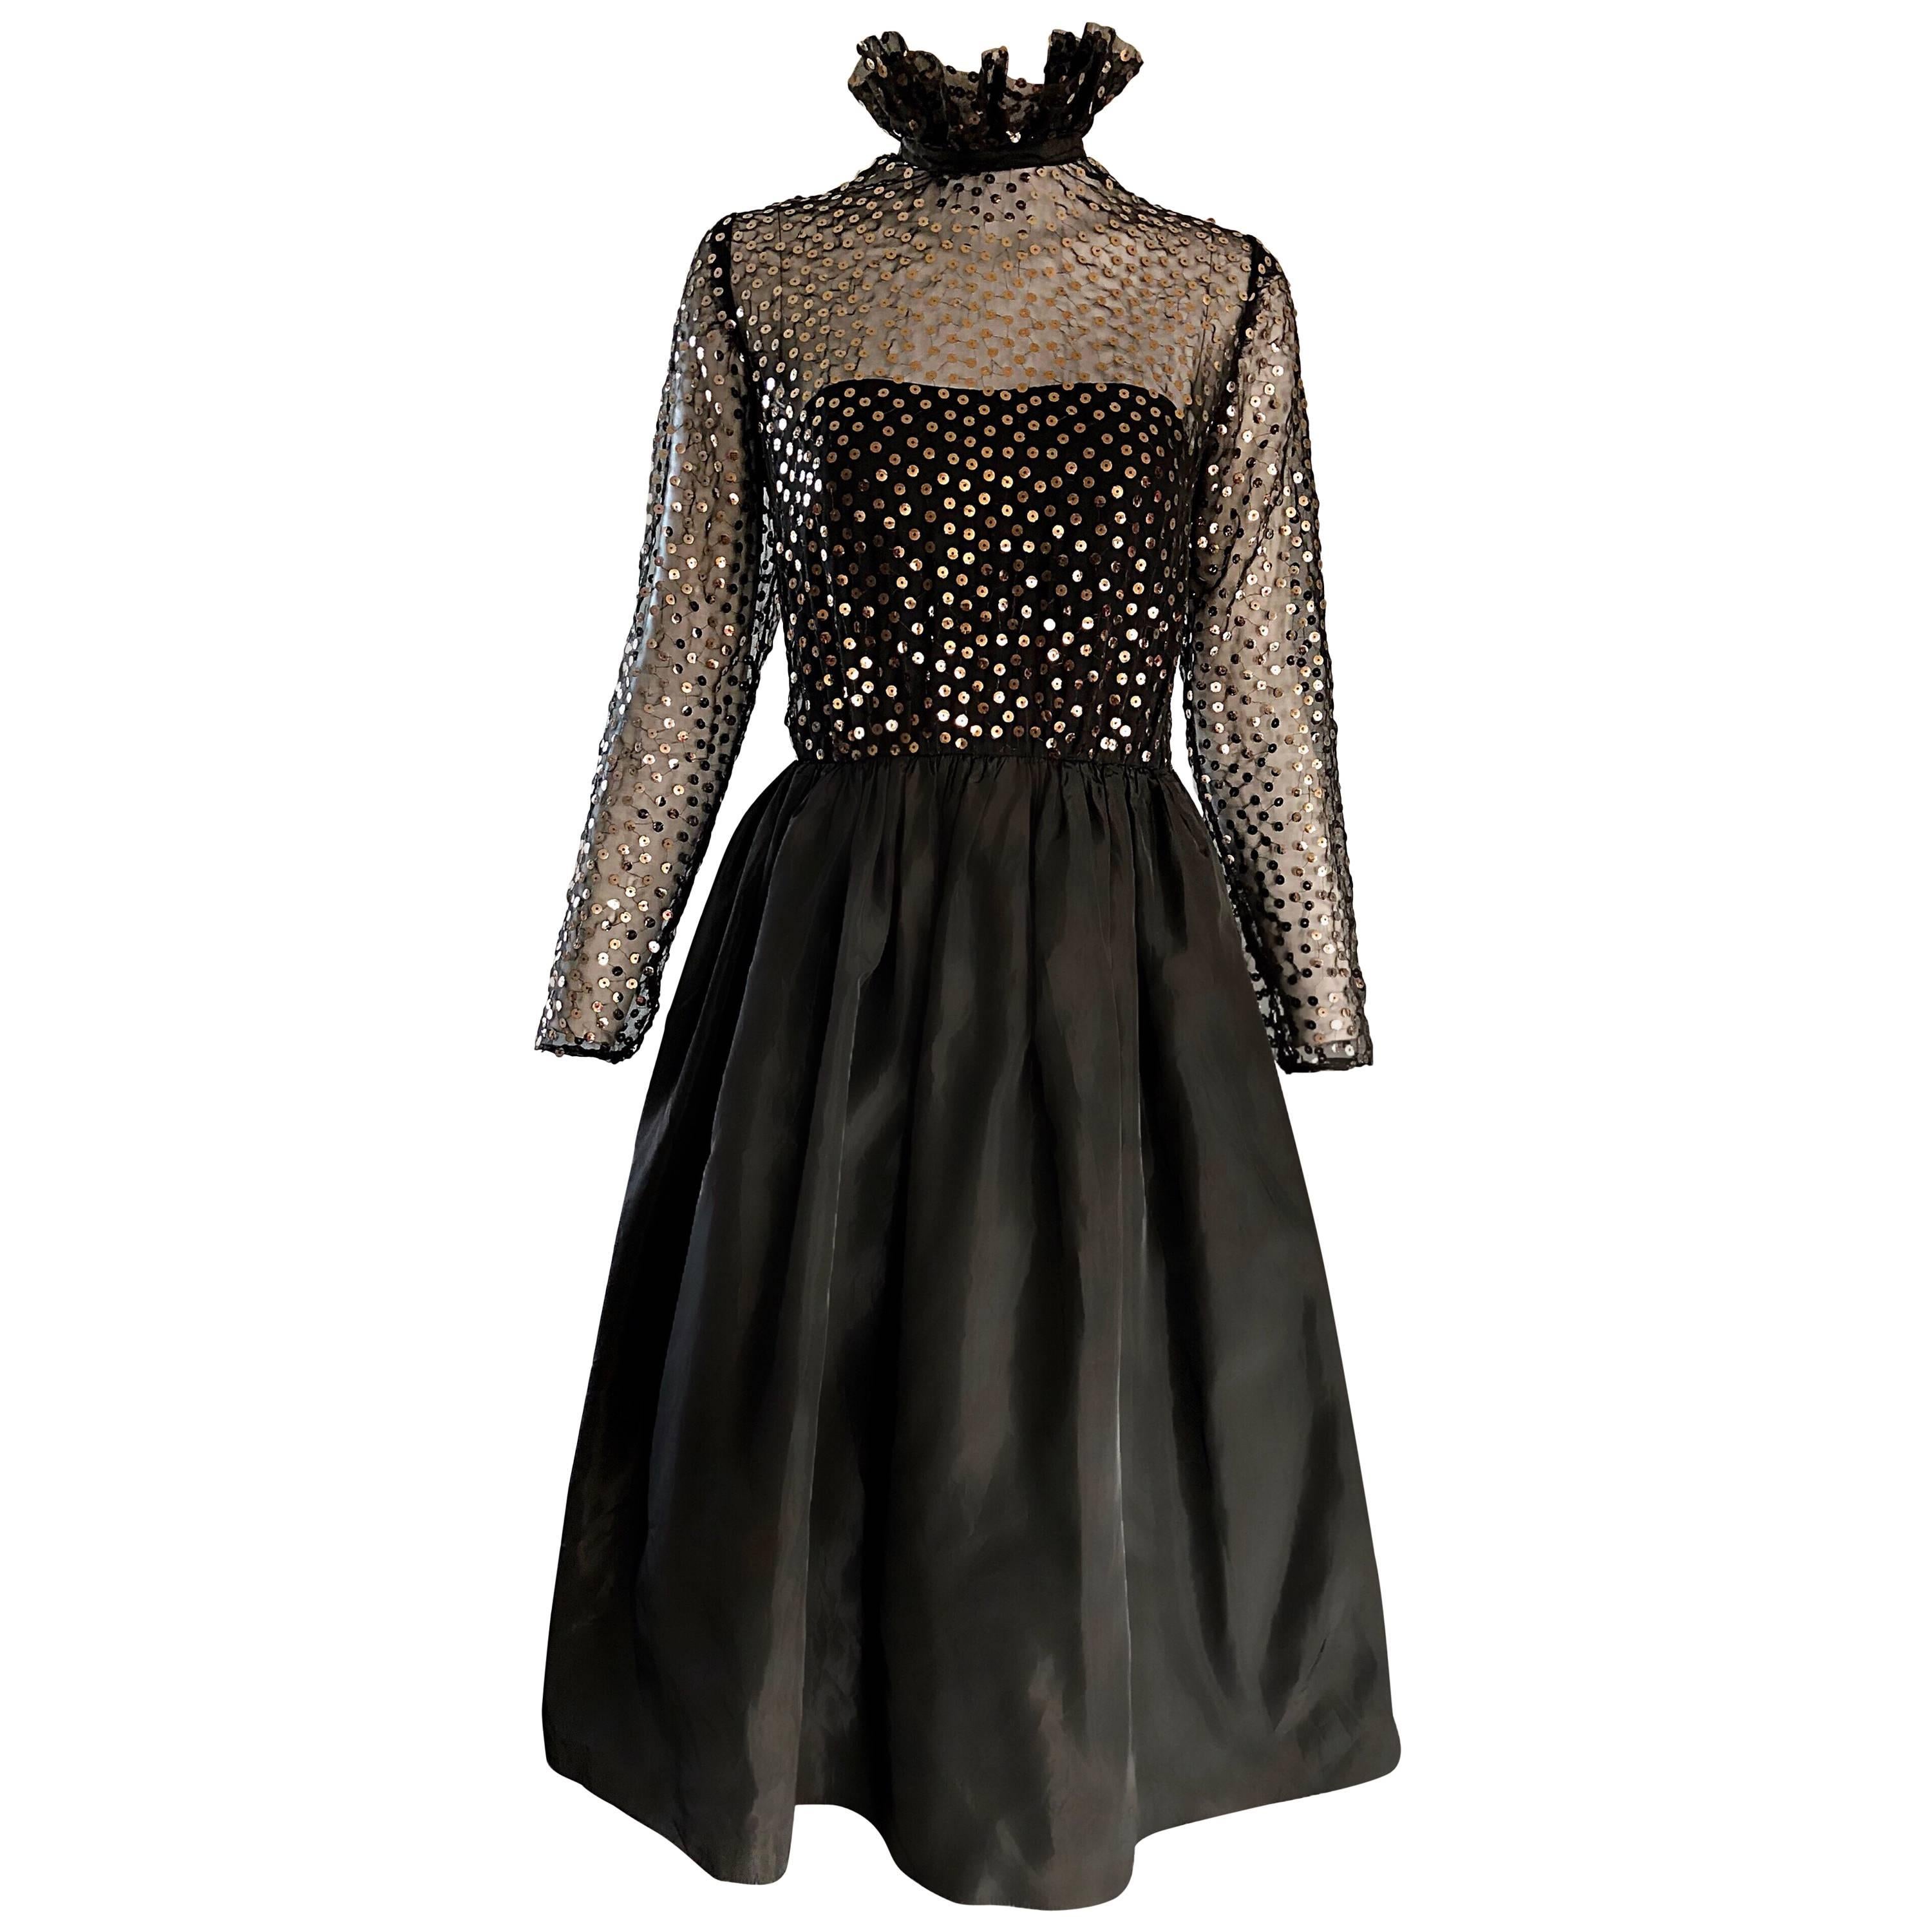 Bill Blass Vintage Black and Gold Sequined Fit n' Flare Victorian Revival Dress